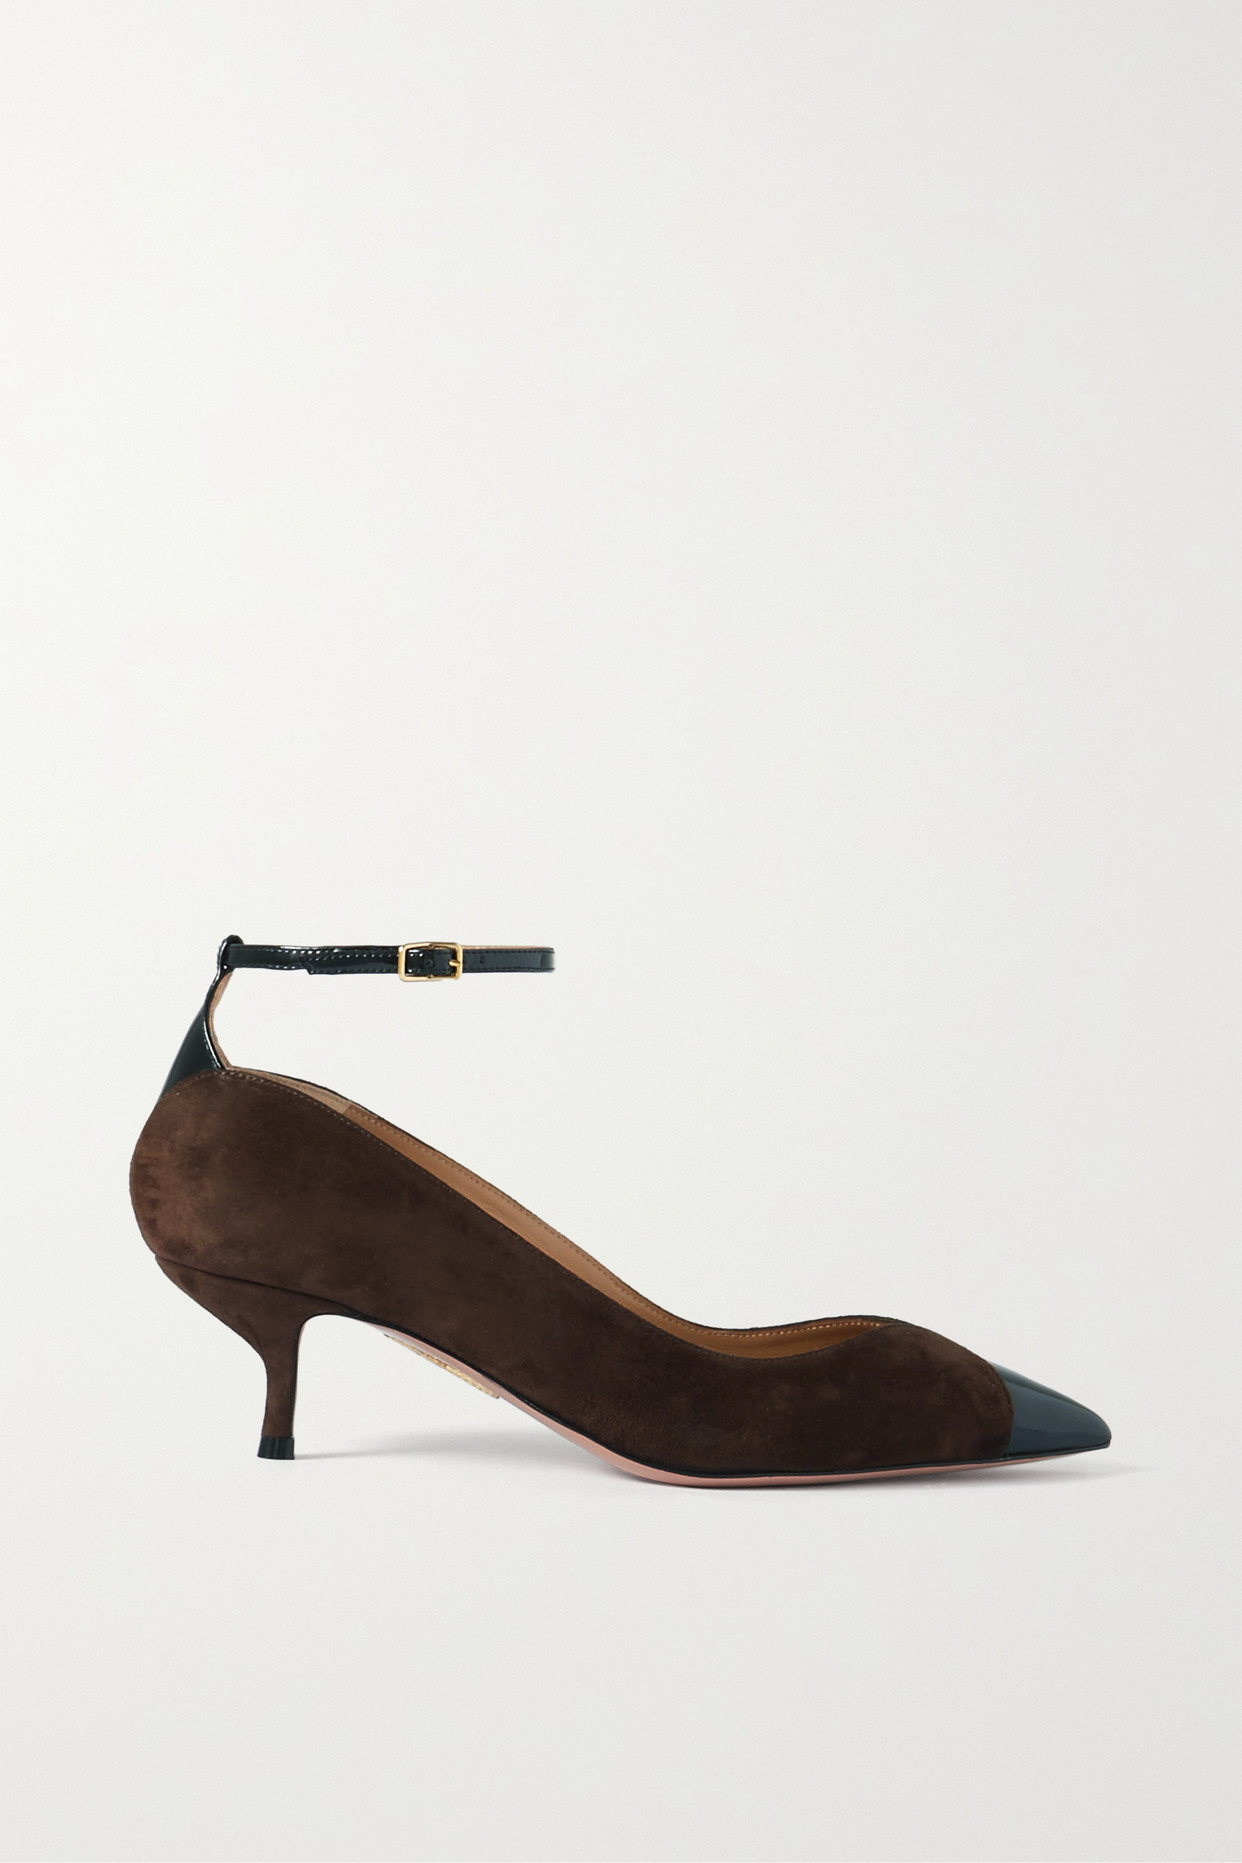 Pinot 50 Patent Leather-Trimmed Suede Pumps